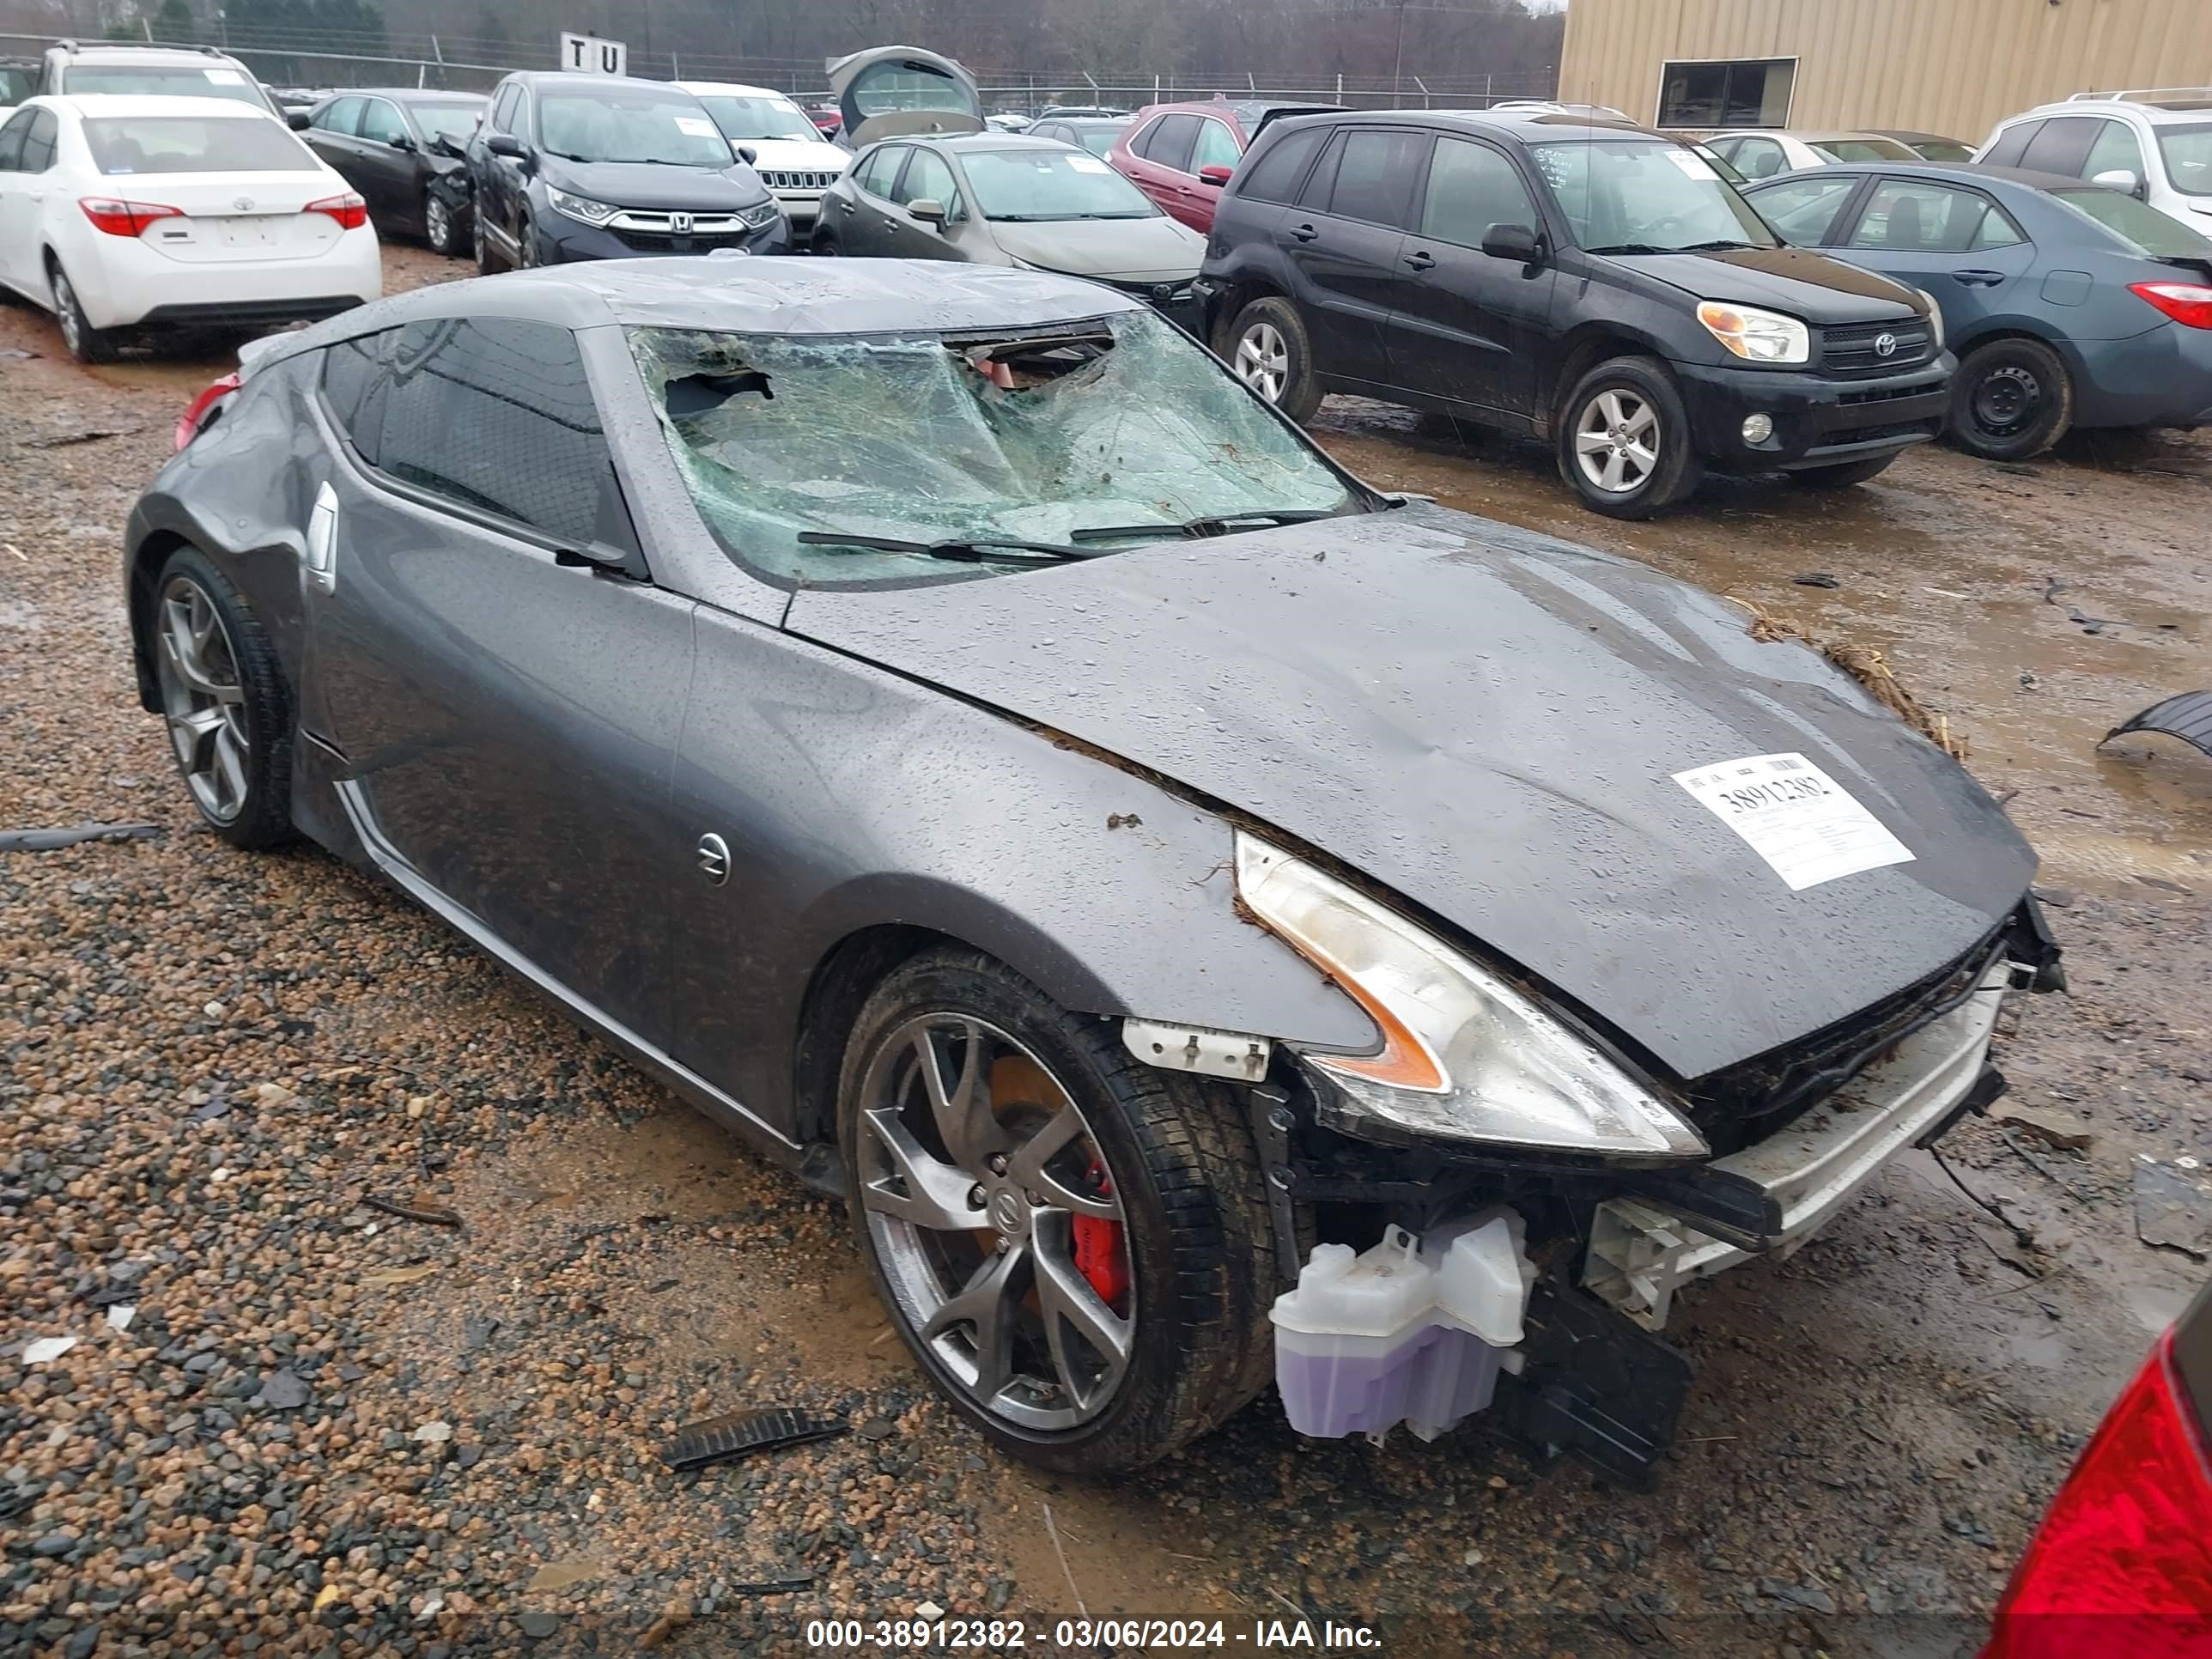 vin: JN1AZ4EH2DM384087 JN1AZ4EH2DM384087 2013 nissan 370z 3700 for Sale in 28025, 5100 Merle Rd, Concord, USA